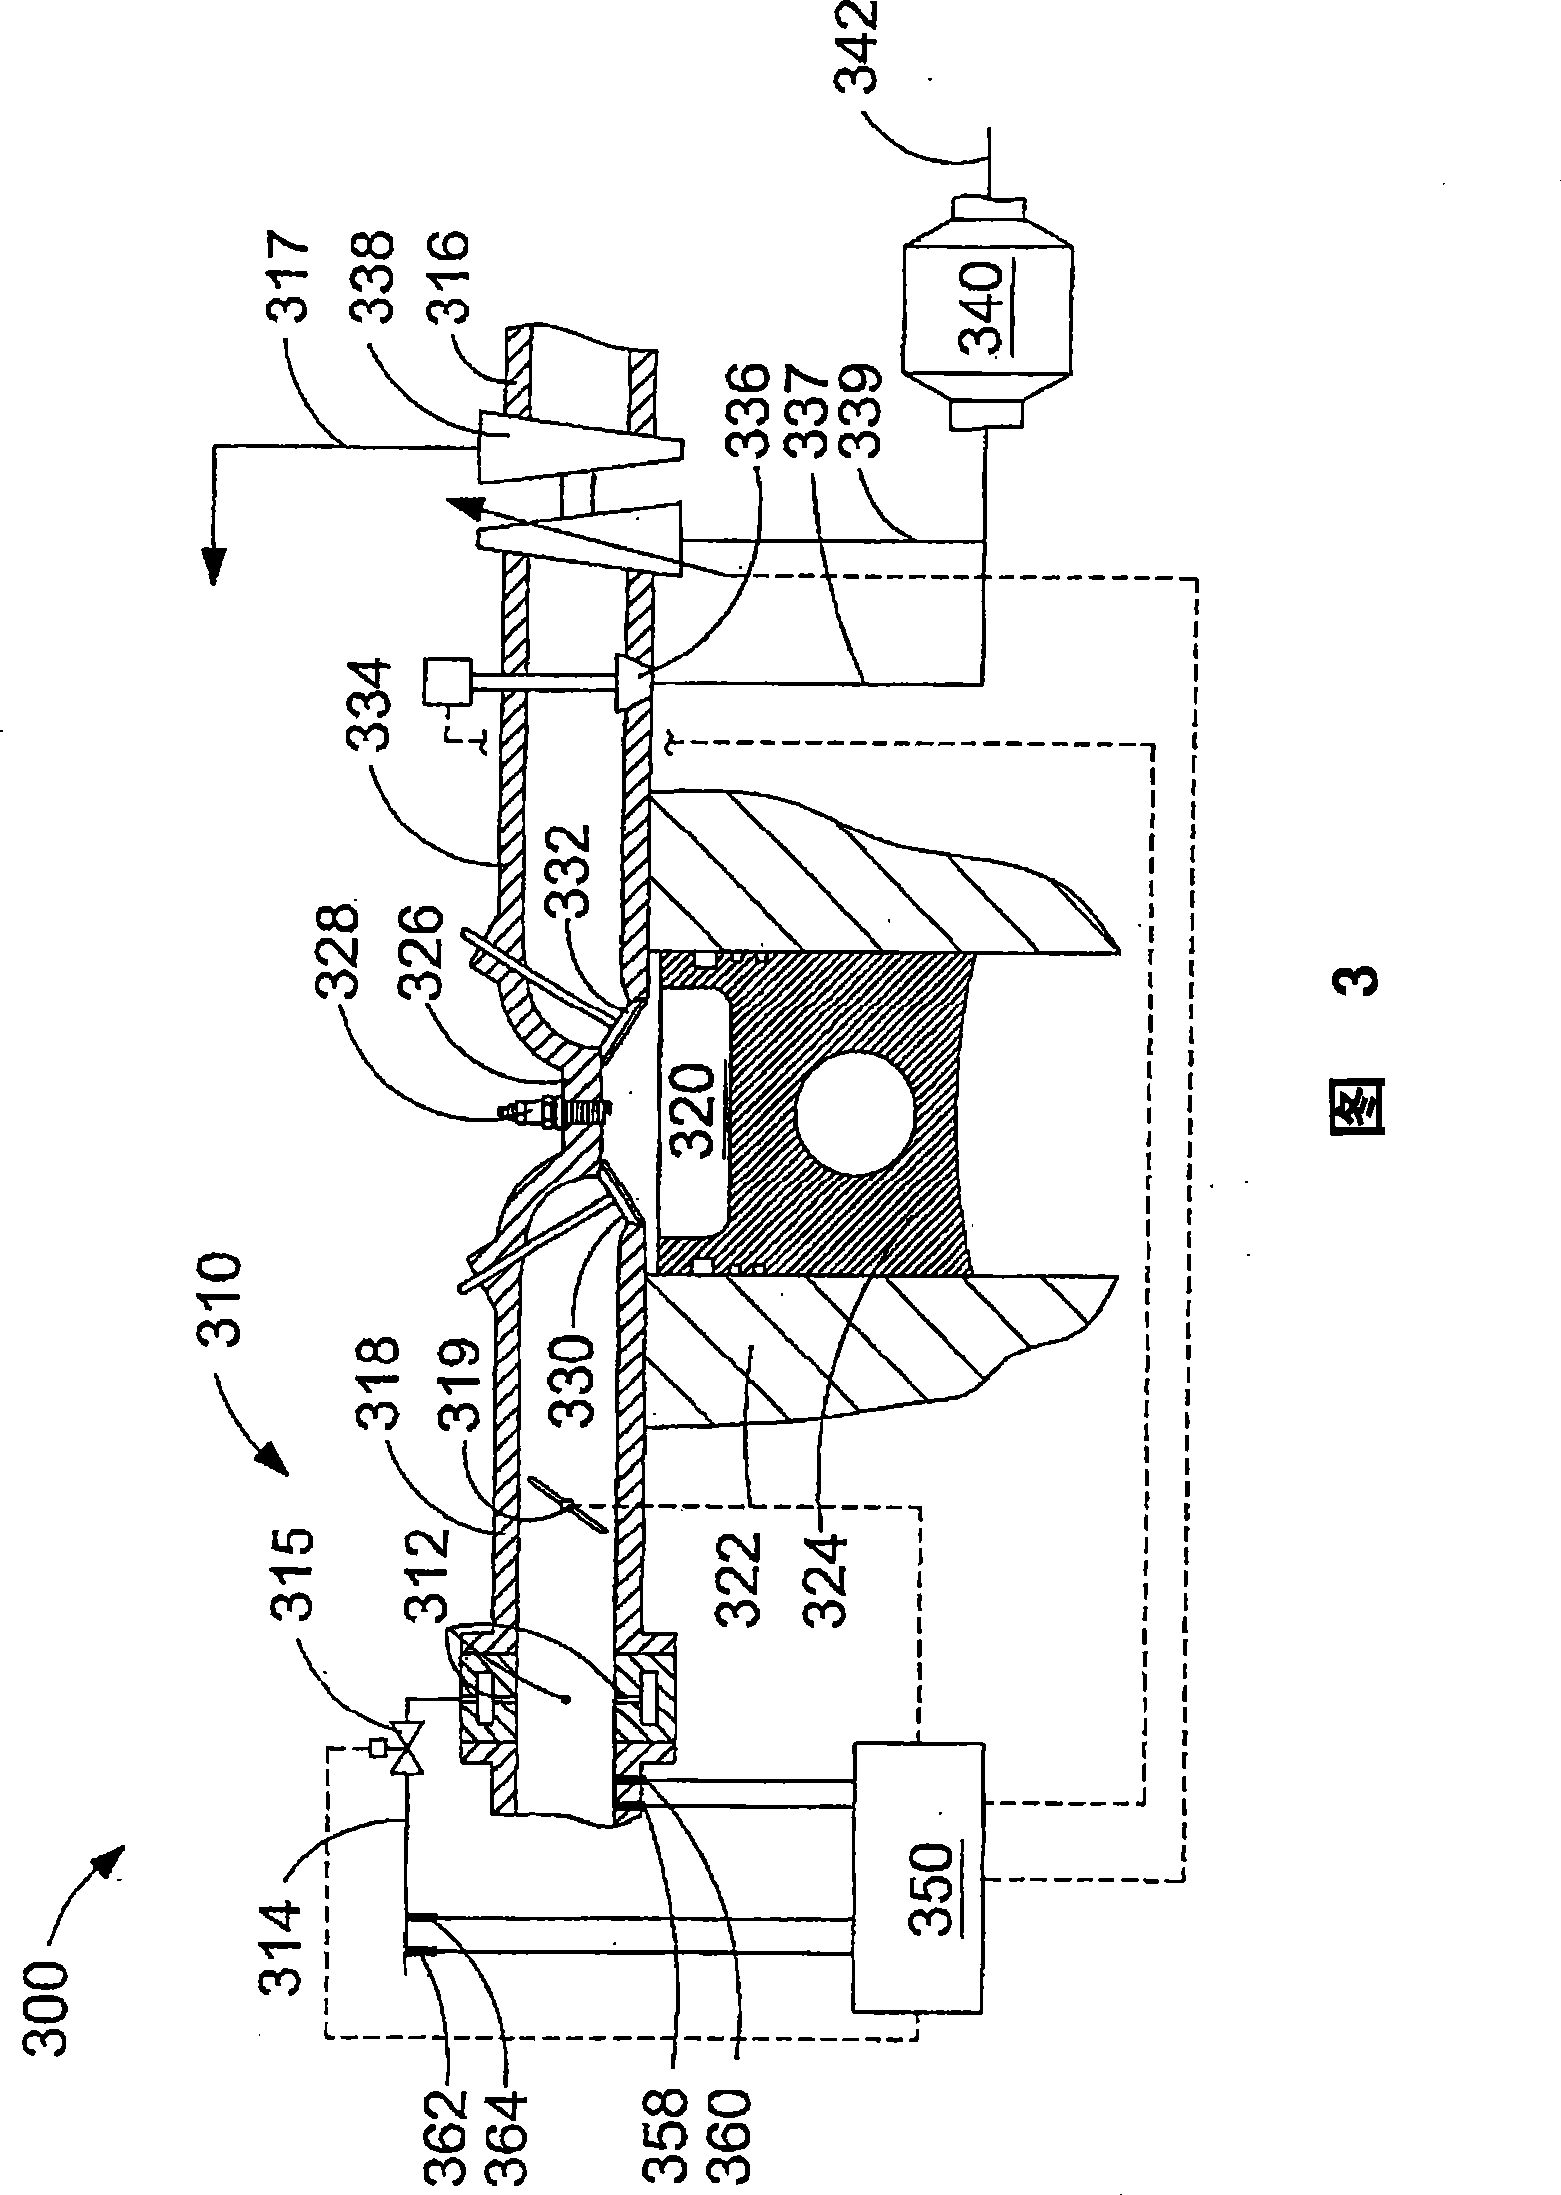 Method and apparatus for operating a methane-fuelled engine and treating exhaust gas with a methane oxidation catalyst